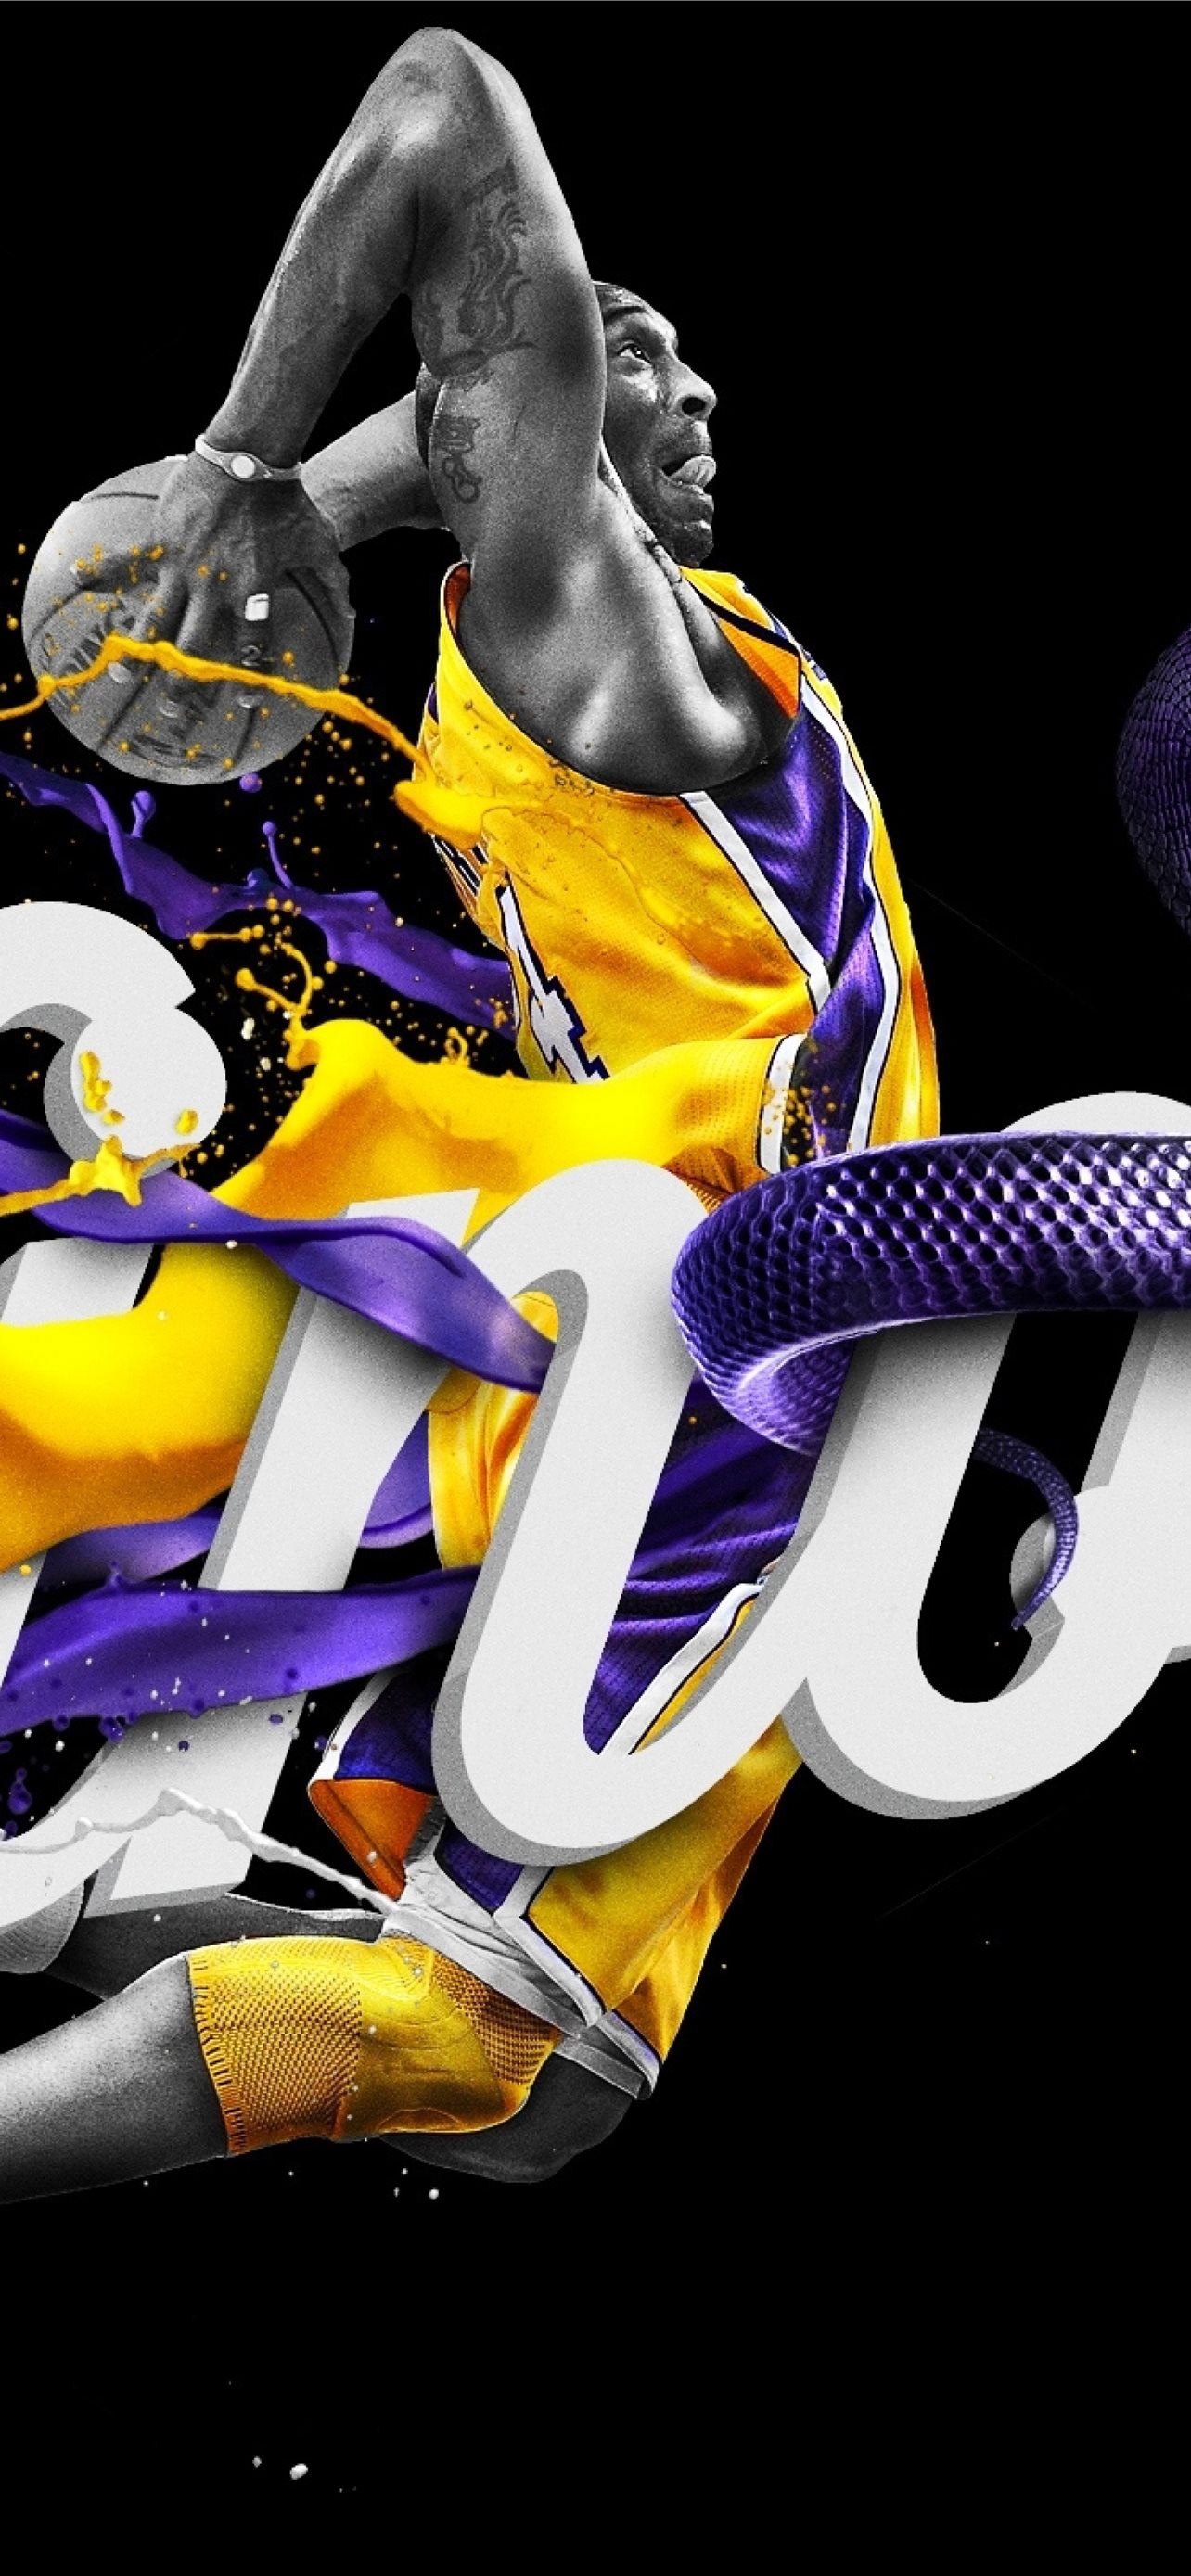 Los Angeles Lakers Wallpapers | Basketball Wallpapers at  BasketWallpapers.com